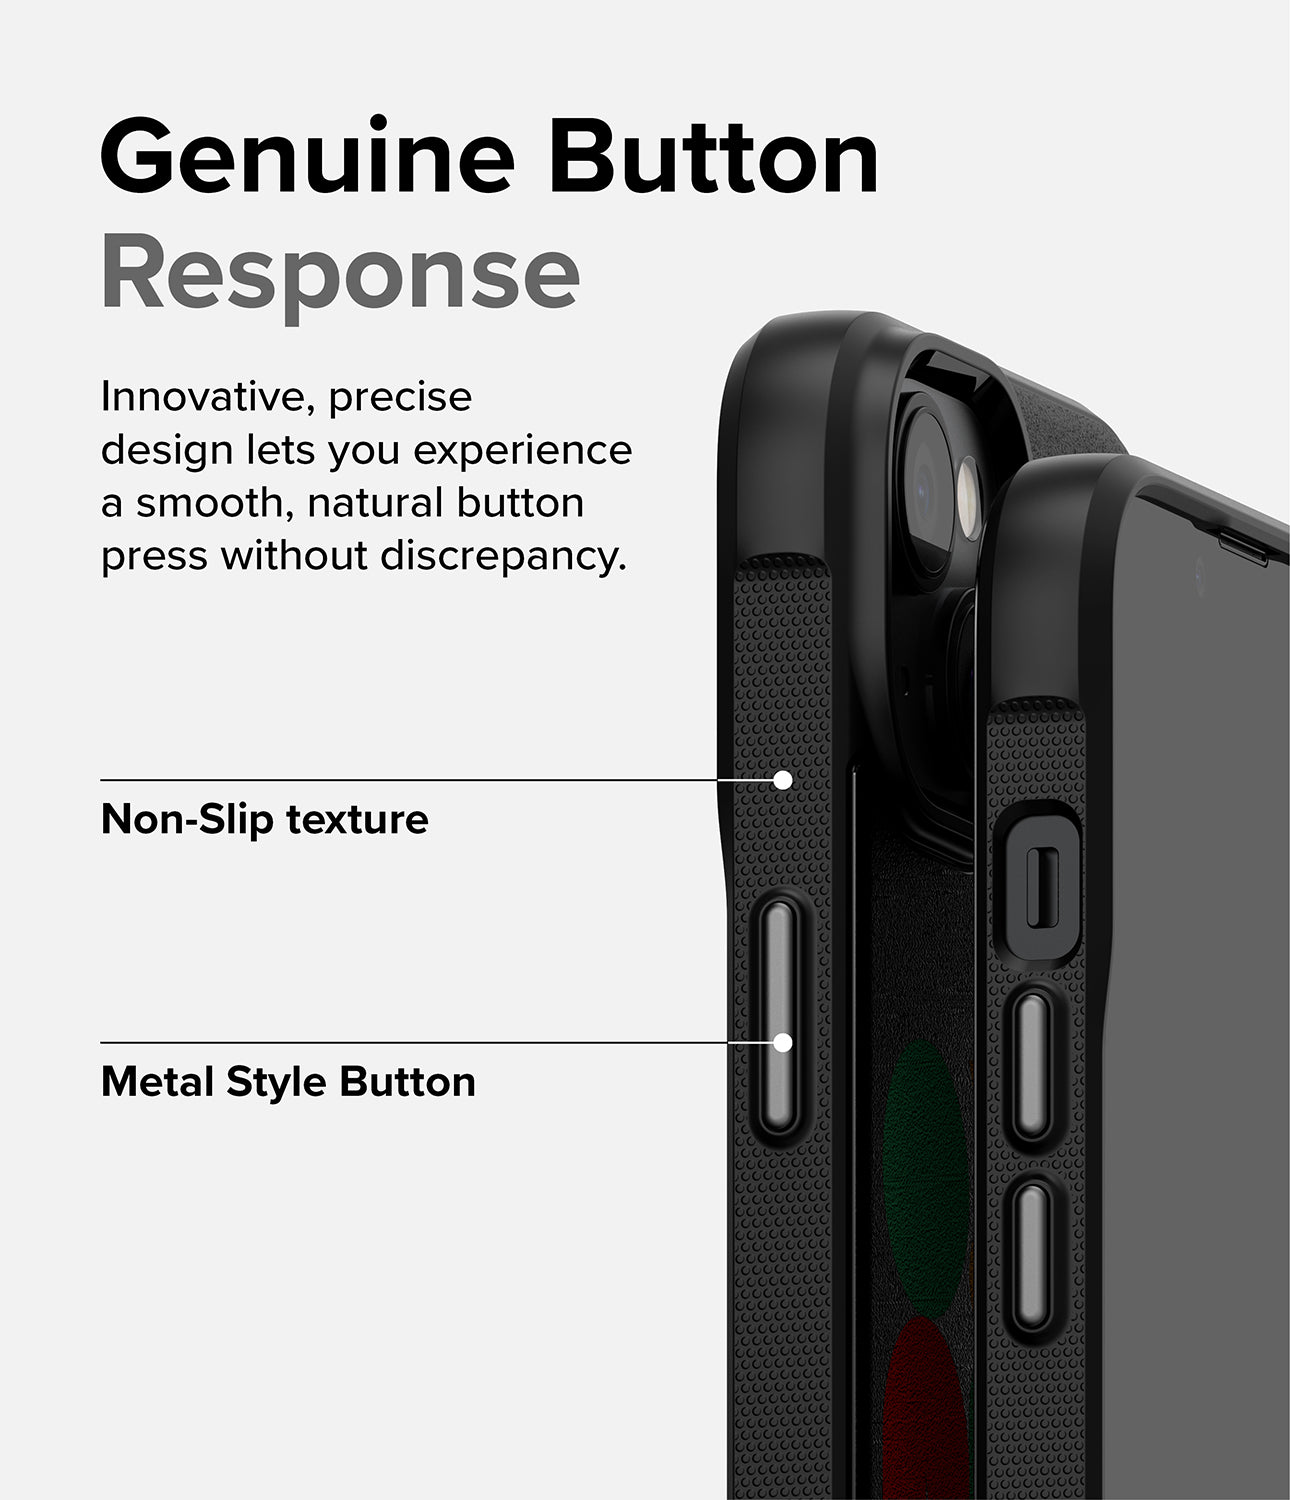 iPhone 14 Plus Case | Onyx Design - Genuine Button Response. Innovative, precise design lets you experience a smooth, natural button press without discrepancy. Non-Slip Texture. Metal Style Button.